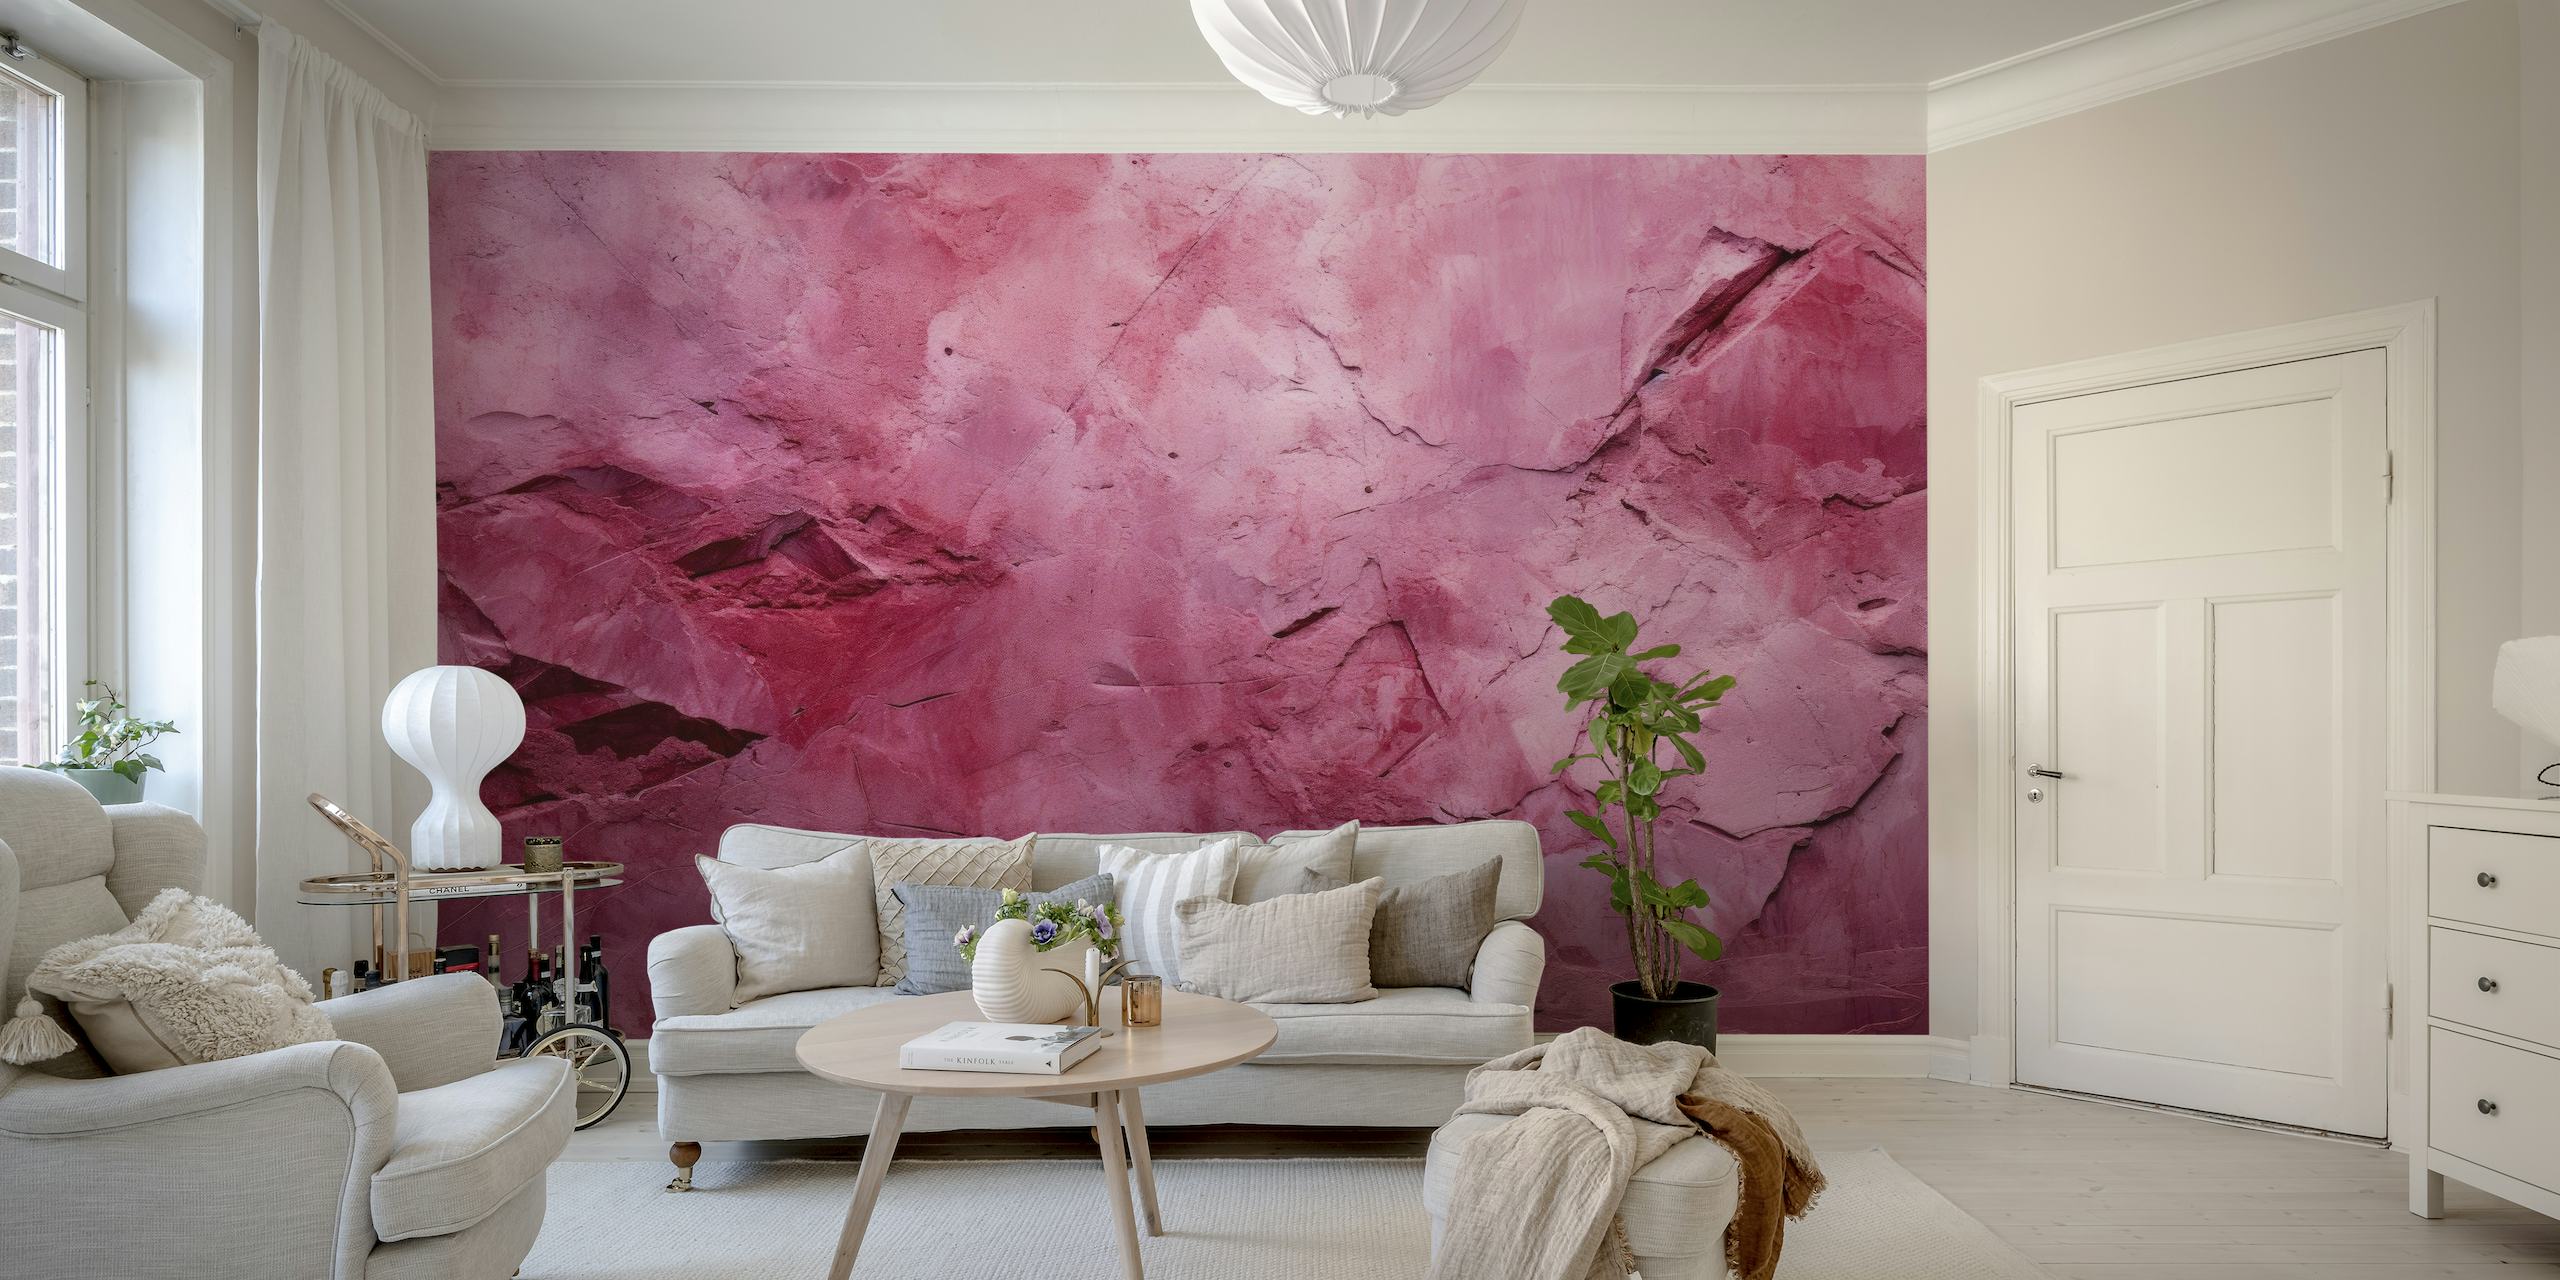 Pink Textured Wall Finish tapety